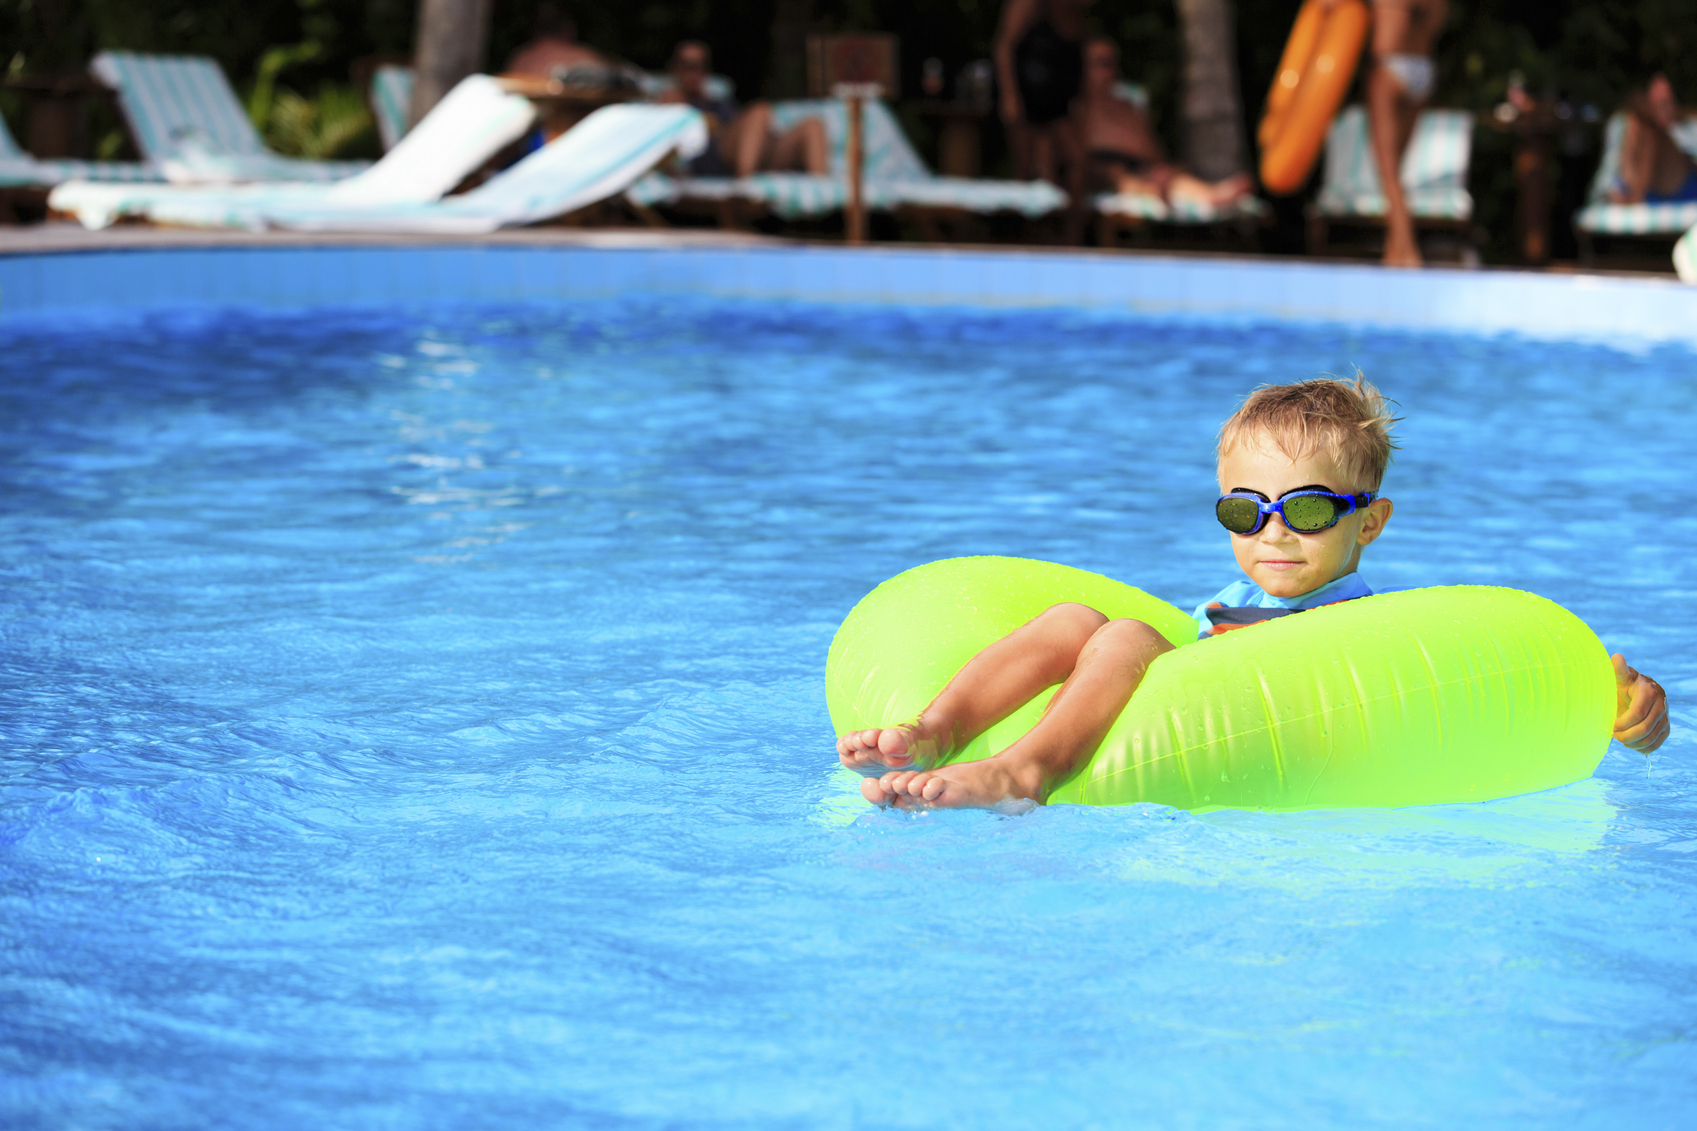 Are Pool Alarms Effective in Preventing Child Drowning?